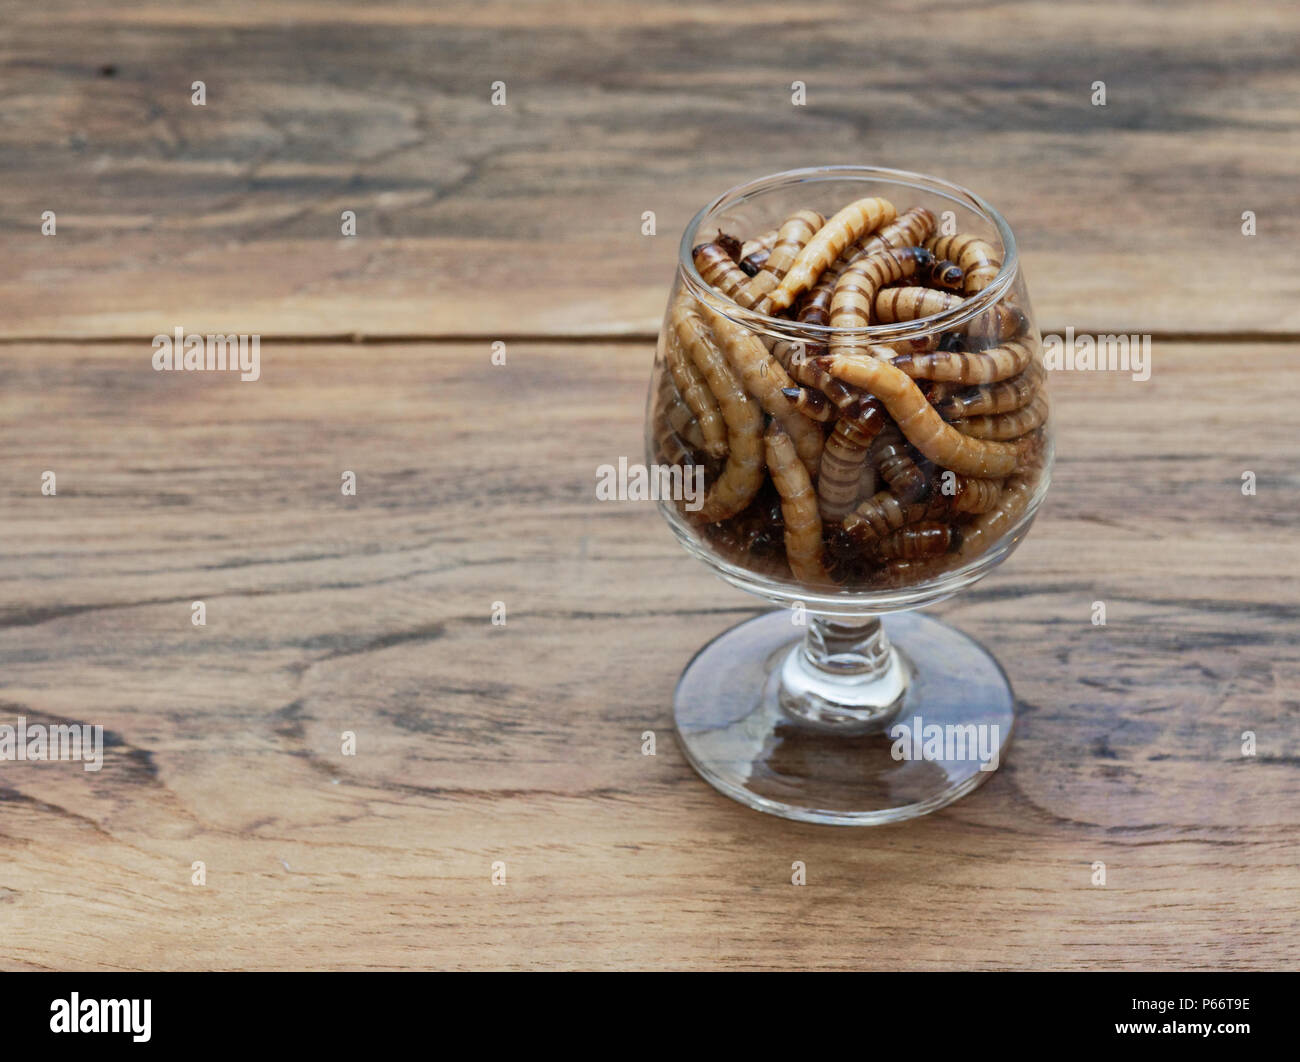 A group of super or giant worms crawl inside small brandy glass over dark wooden surface used as background in exotic pet food, insect, Halloween, celebration, decoration, scary, and haunting concepts Stock Photo